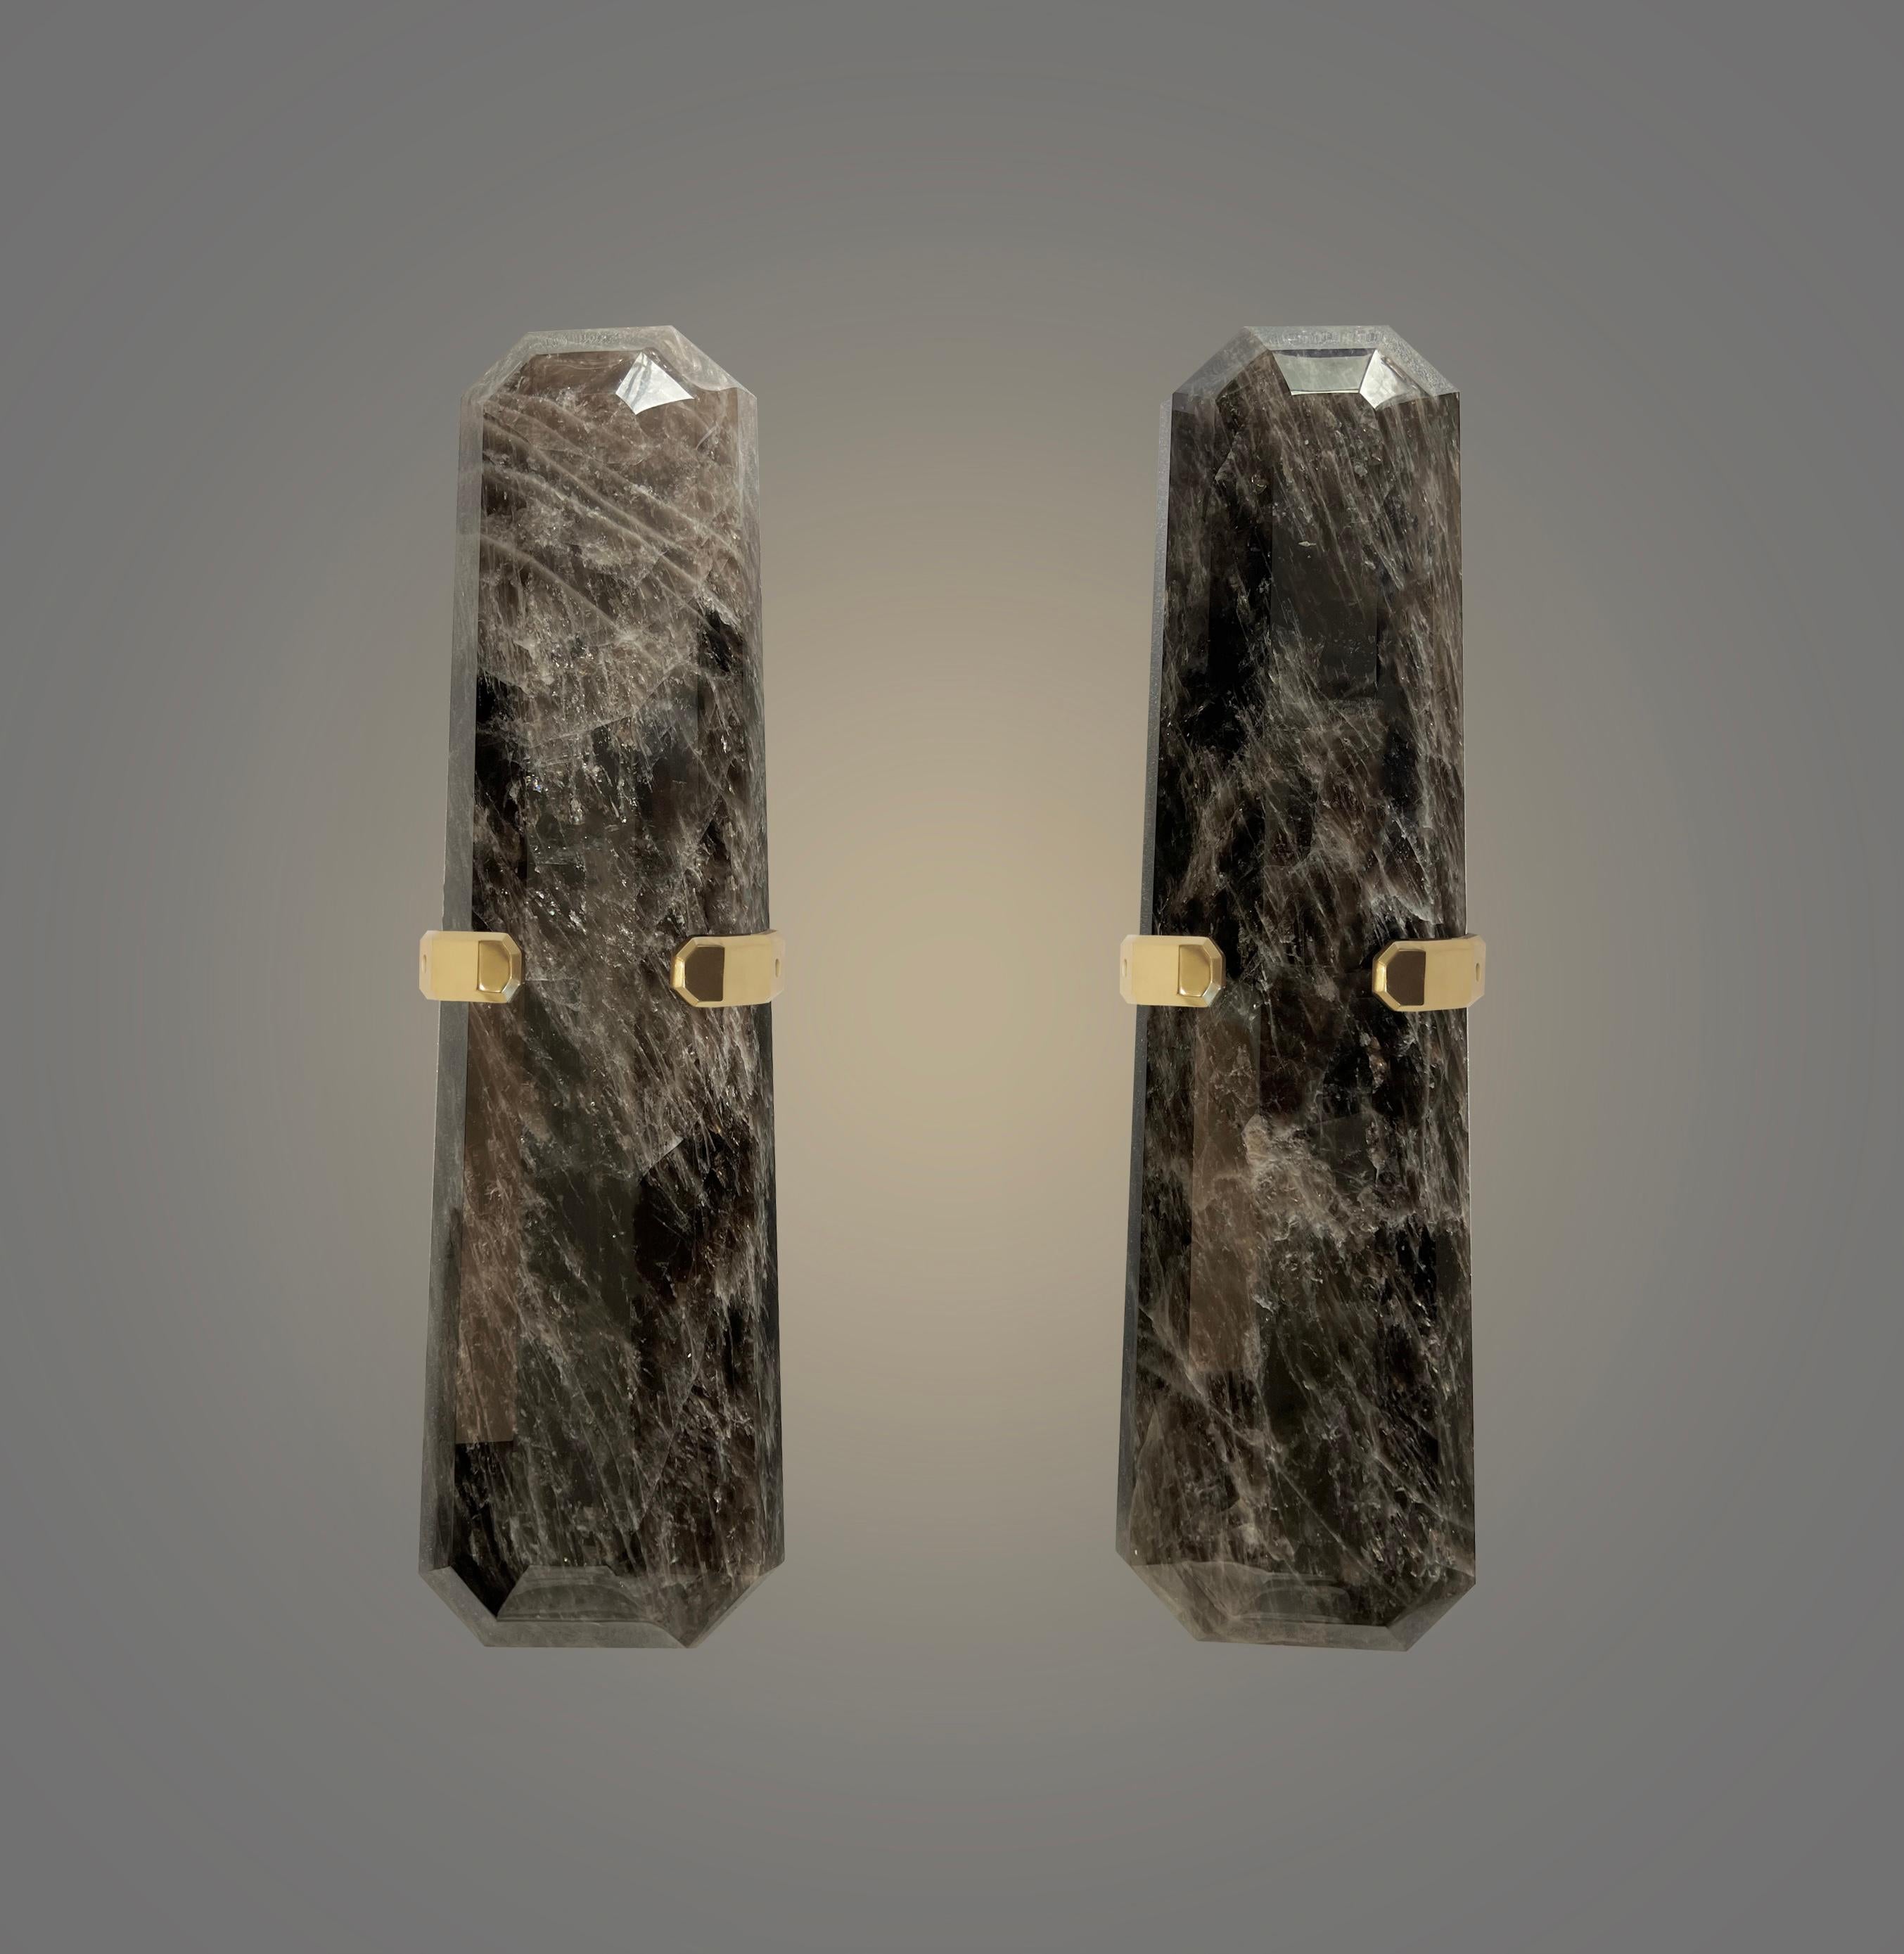 Pair of finely carved multifaceted smoky rock crystal sconces with polished brass decorations. two sockets installed.160w total.

recommend jbox 2in x4in
Custom size and metal finish upon request.